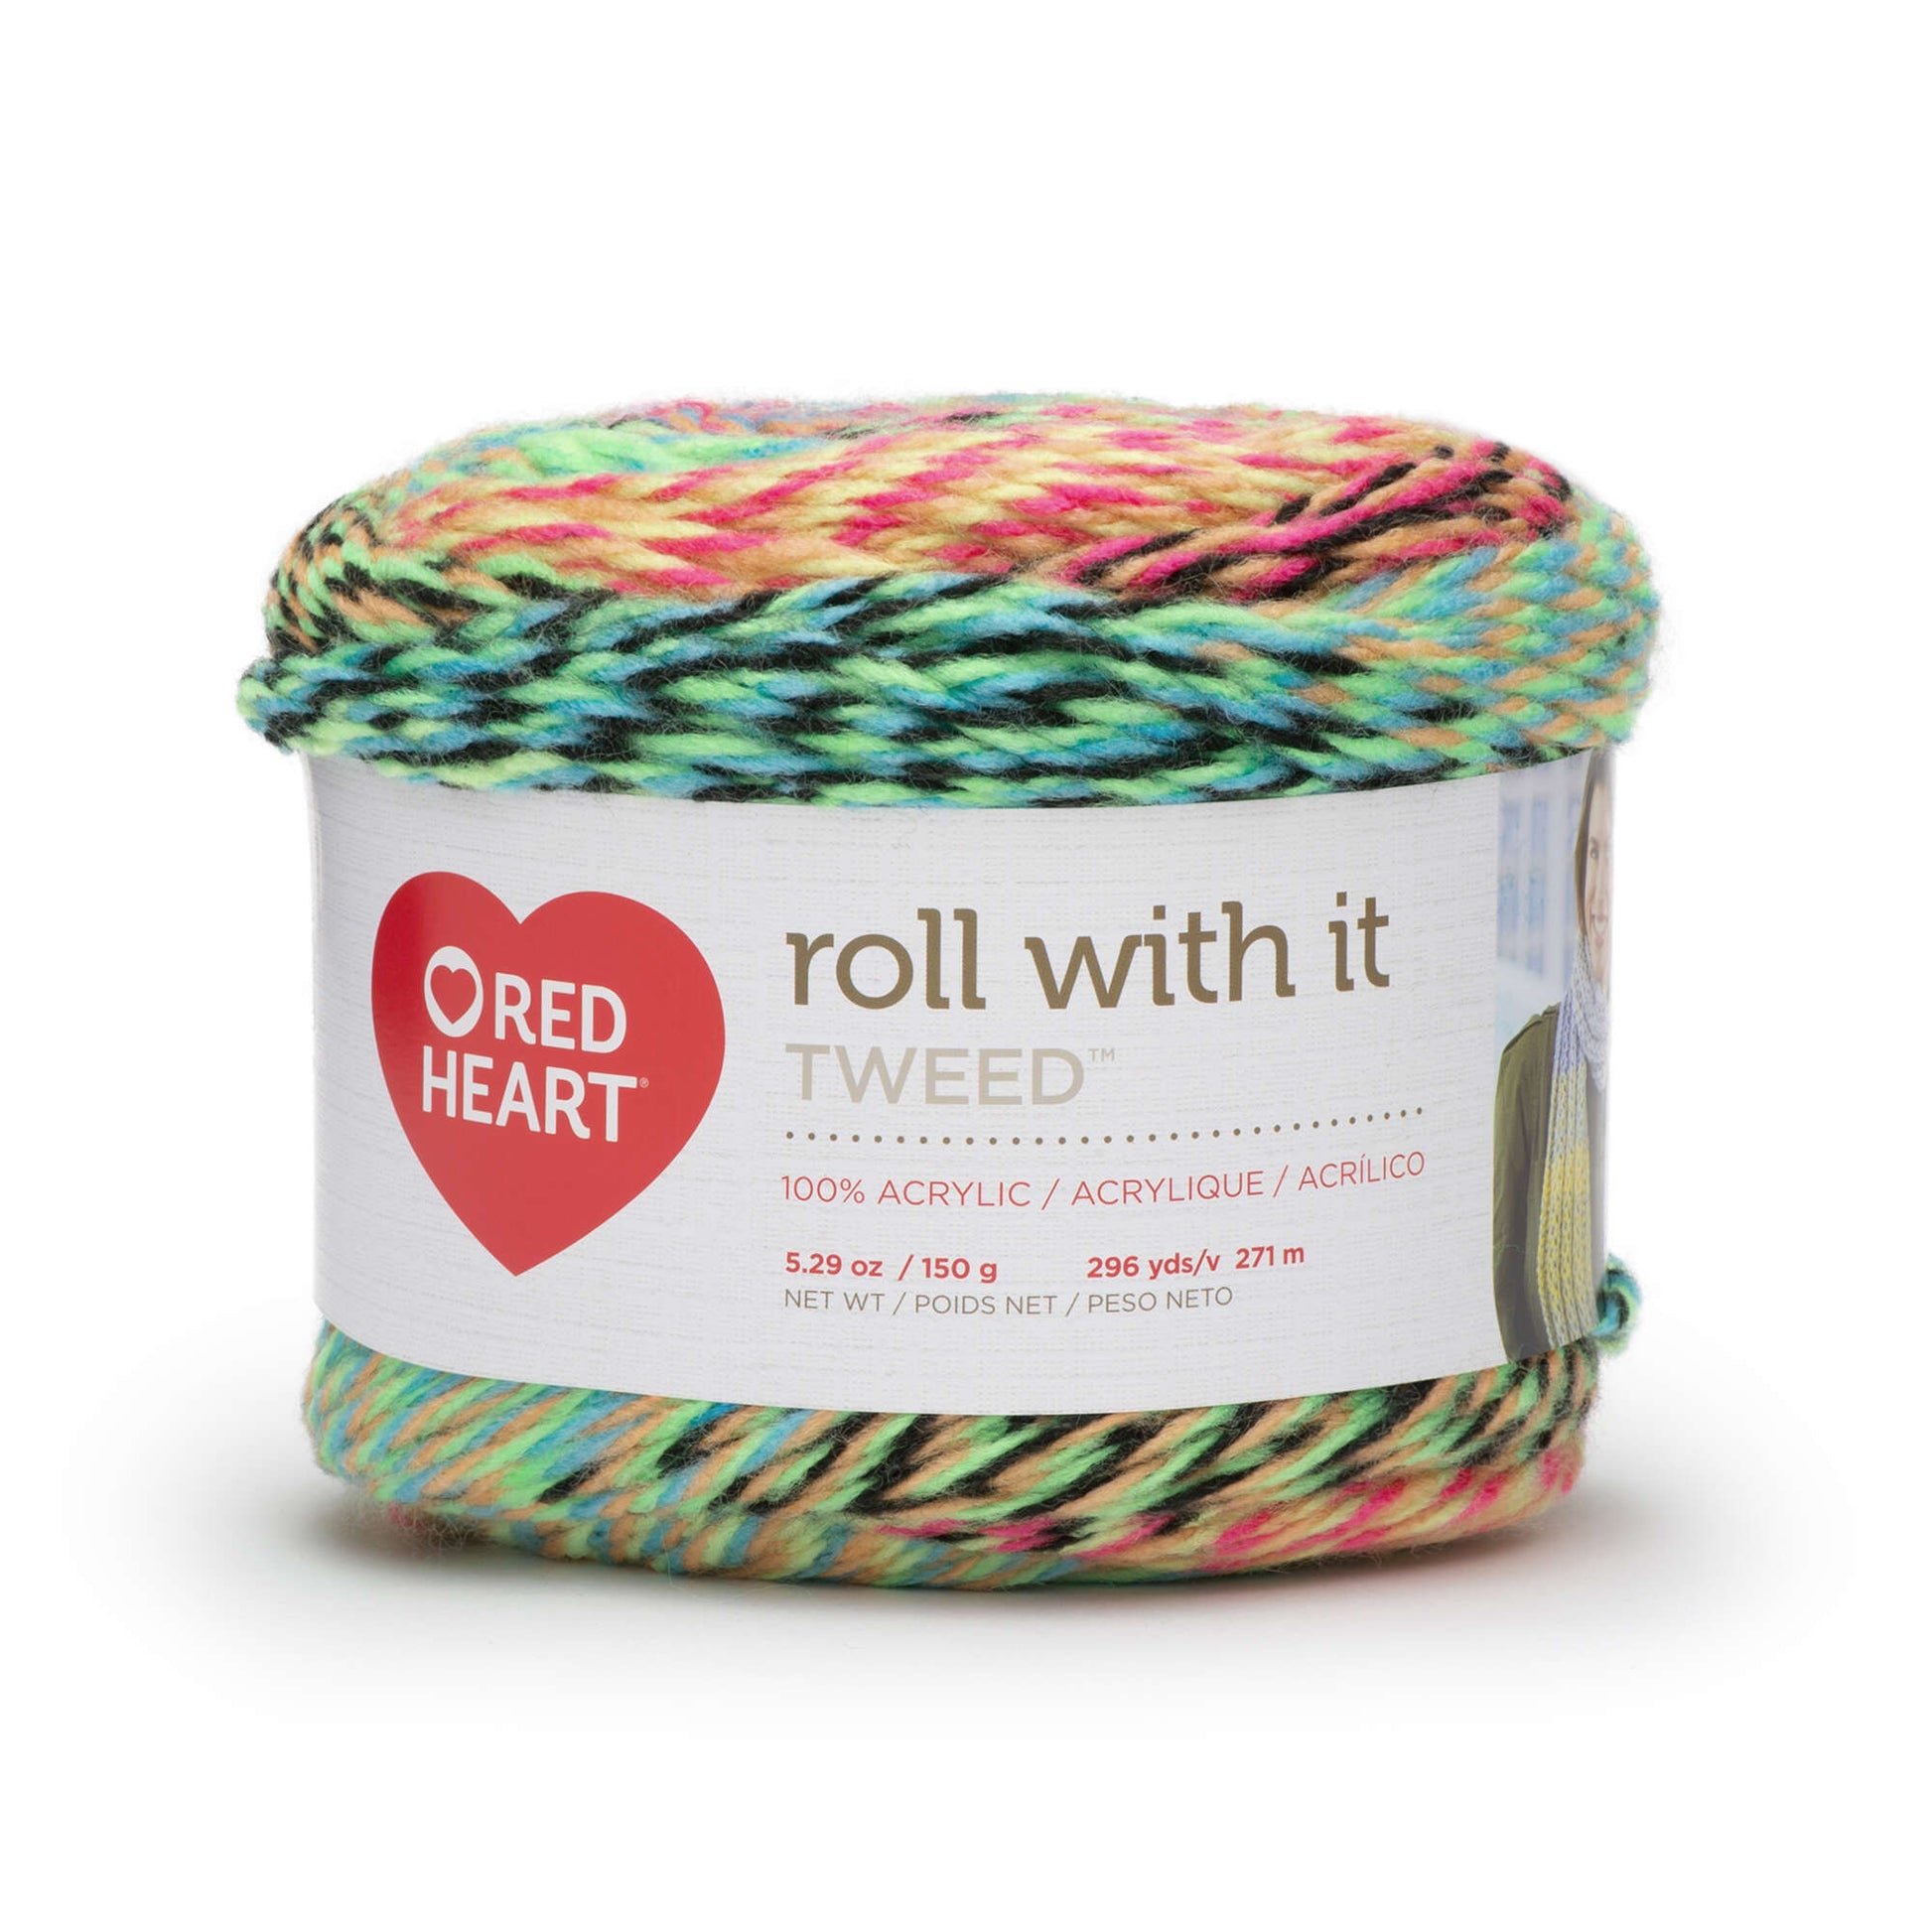 Red Heart Roll With It Tweed Yarn - Clearance shades Neon